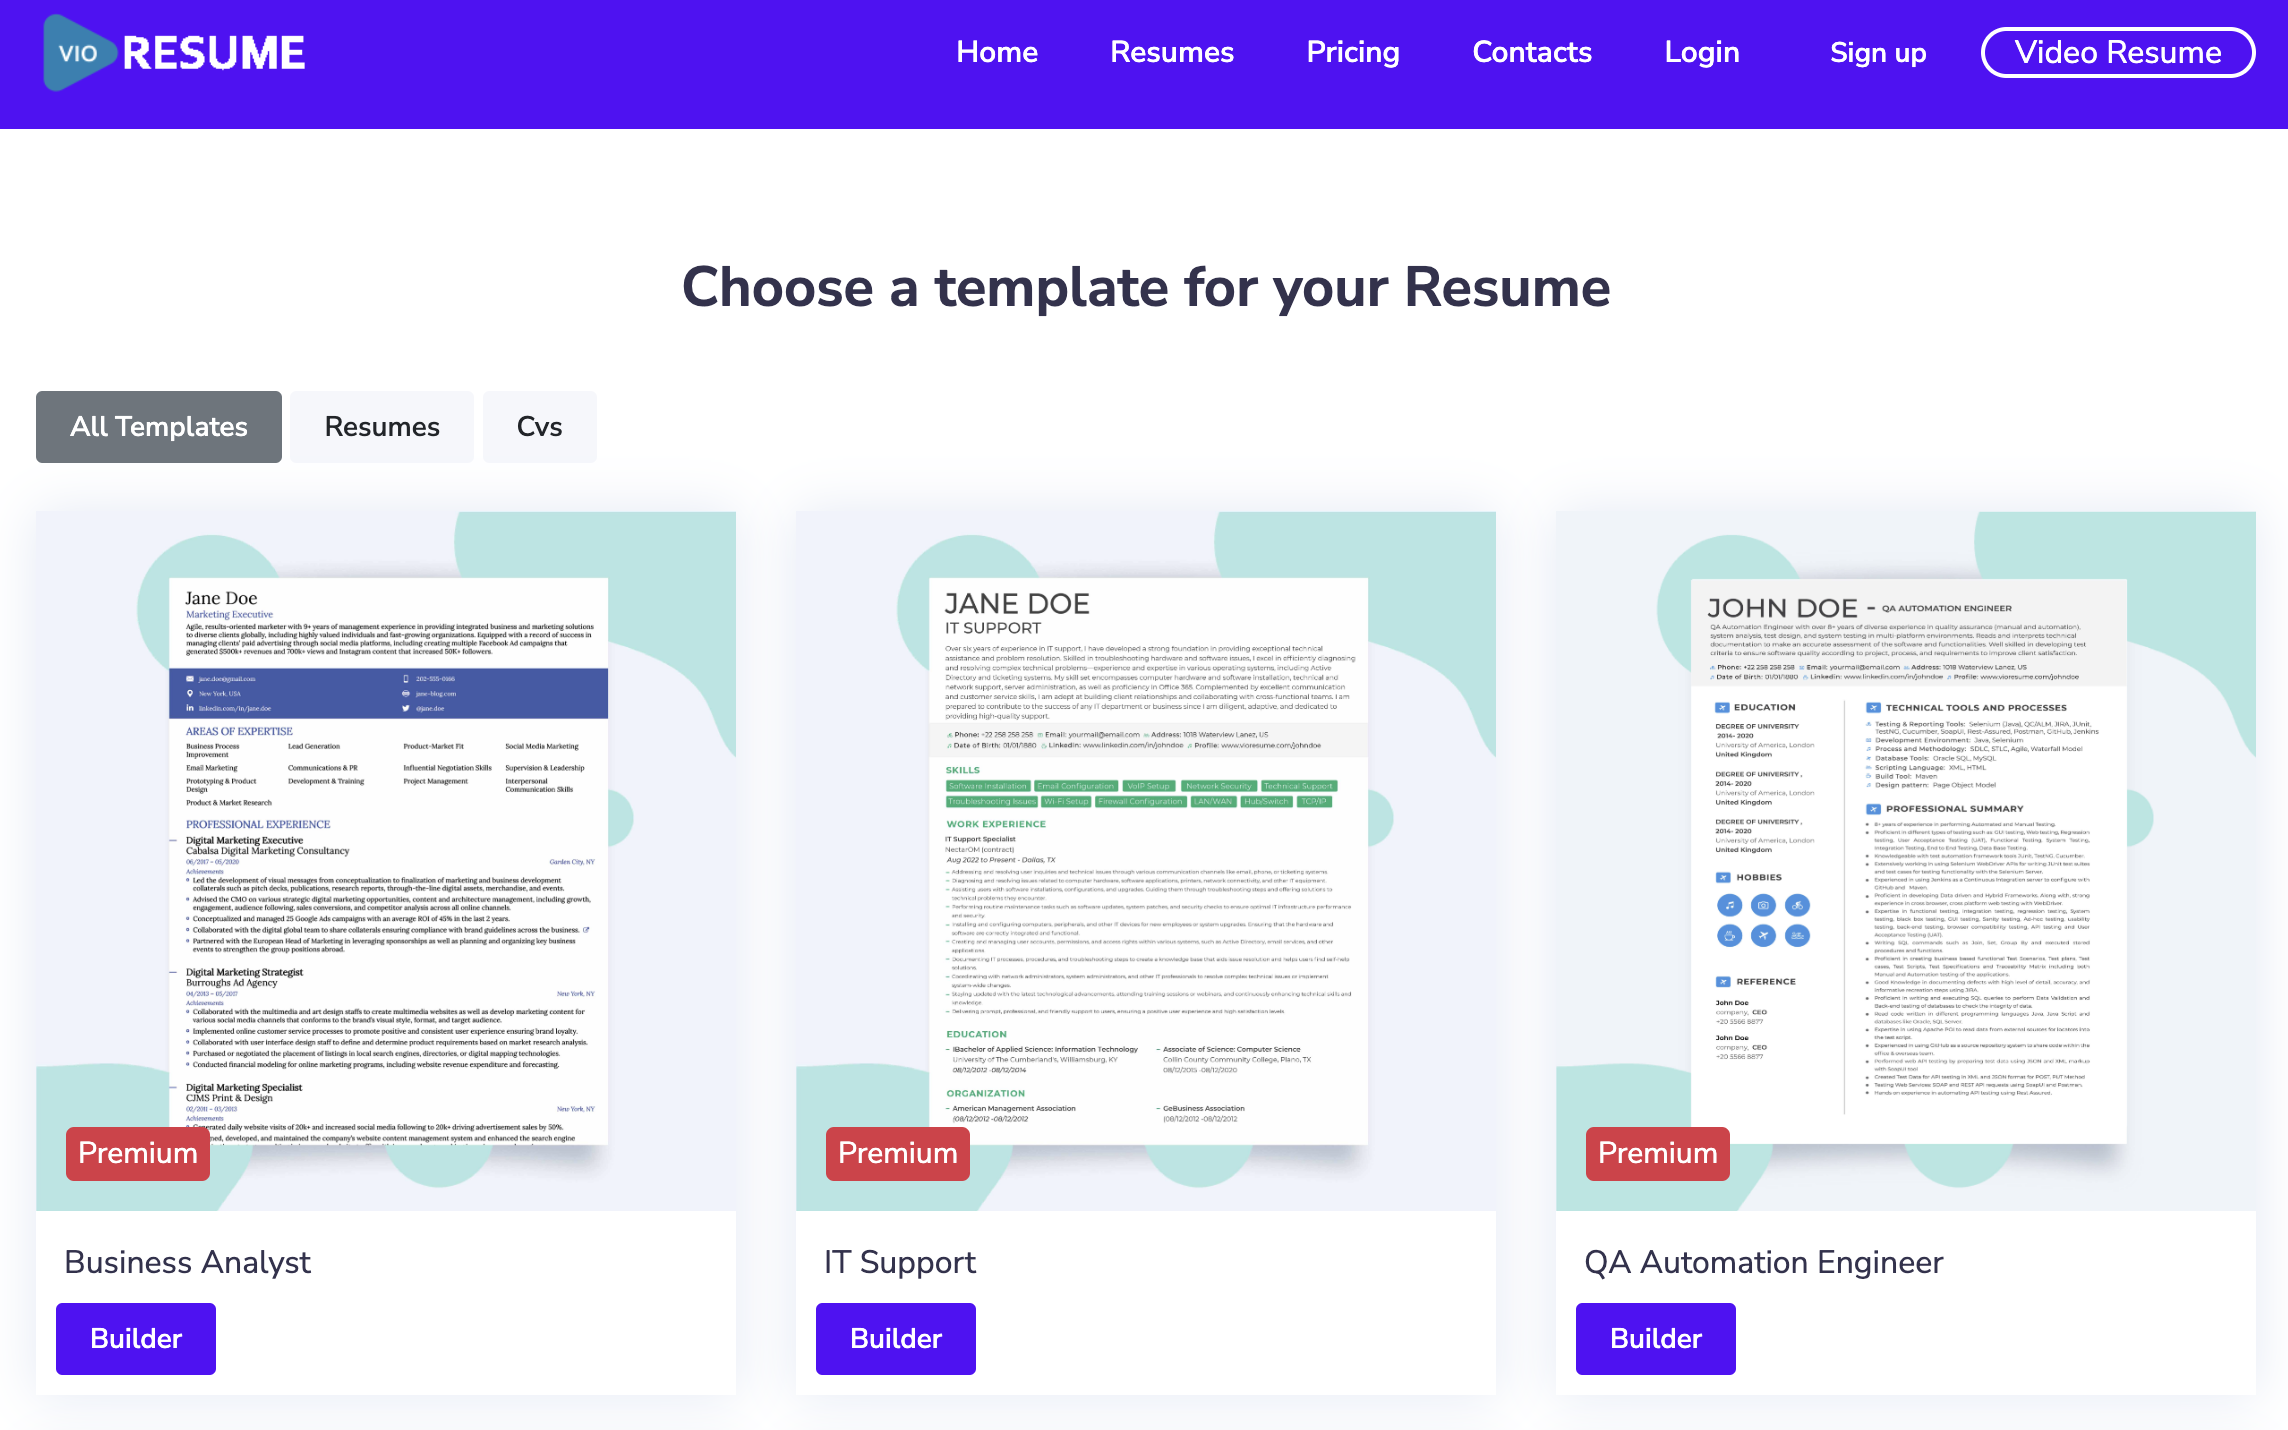 What services does VioResume resume builder provide?